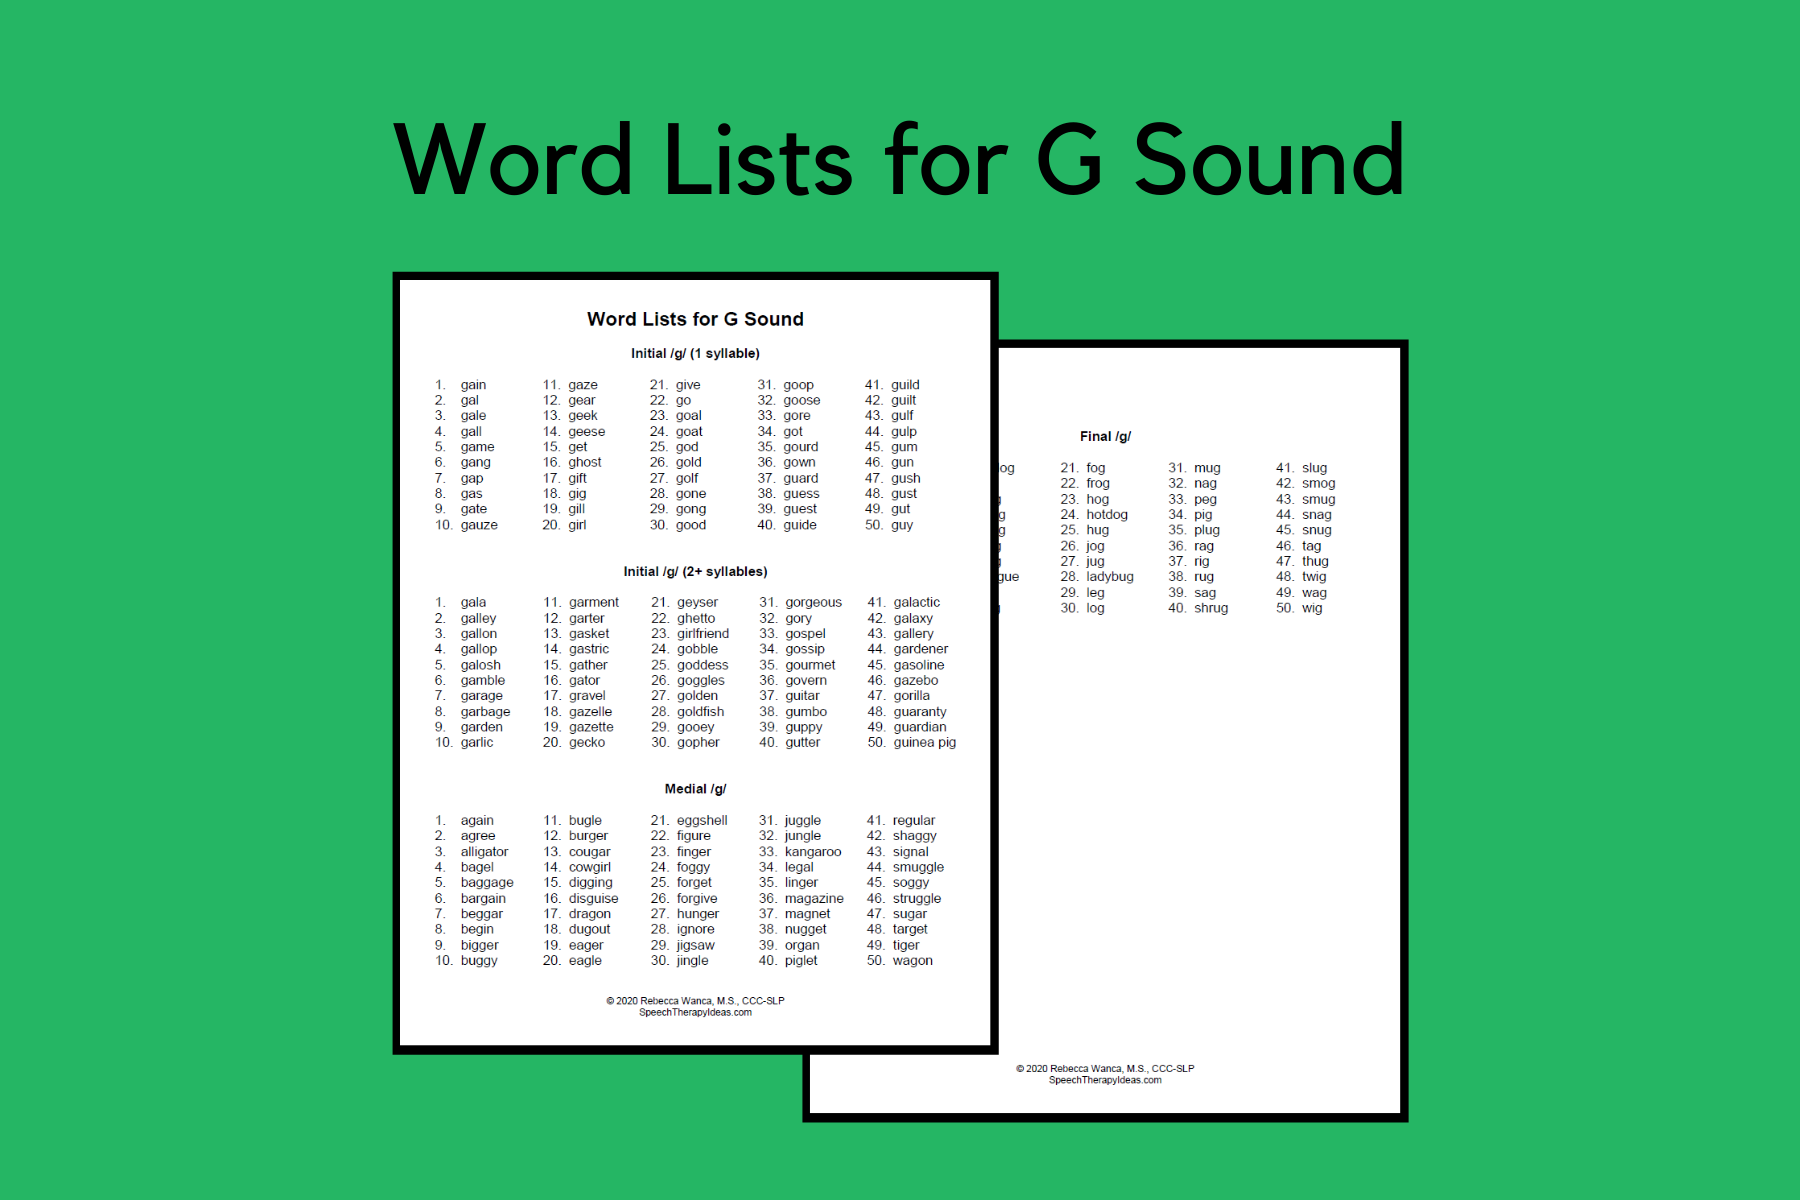 Word Lists for G Sound